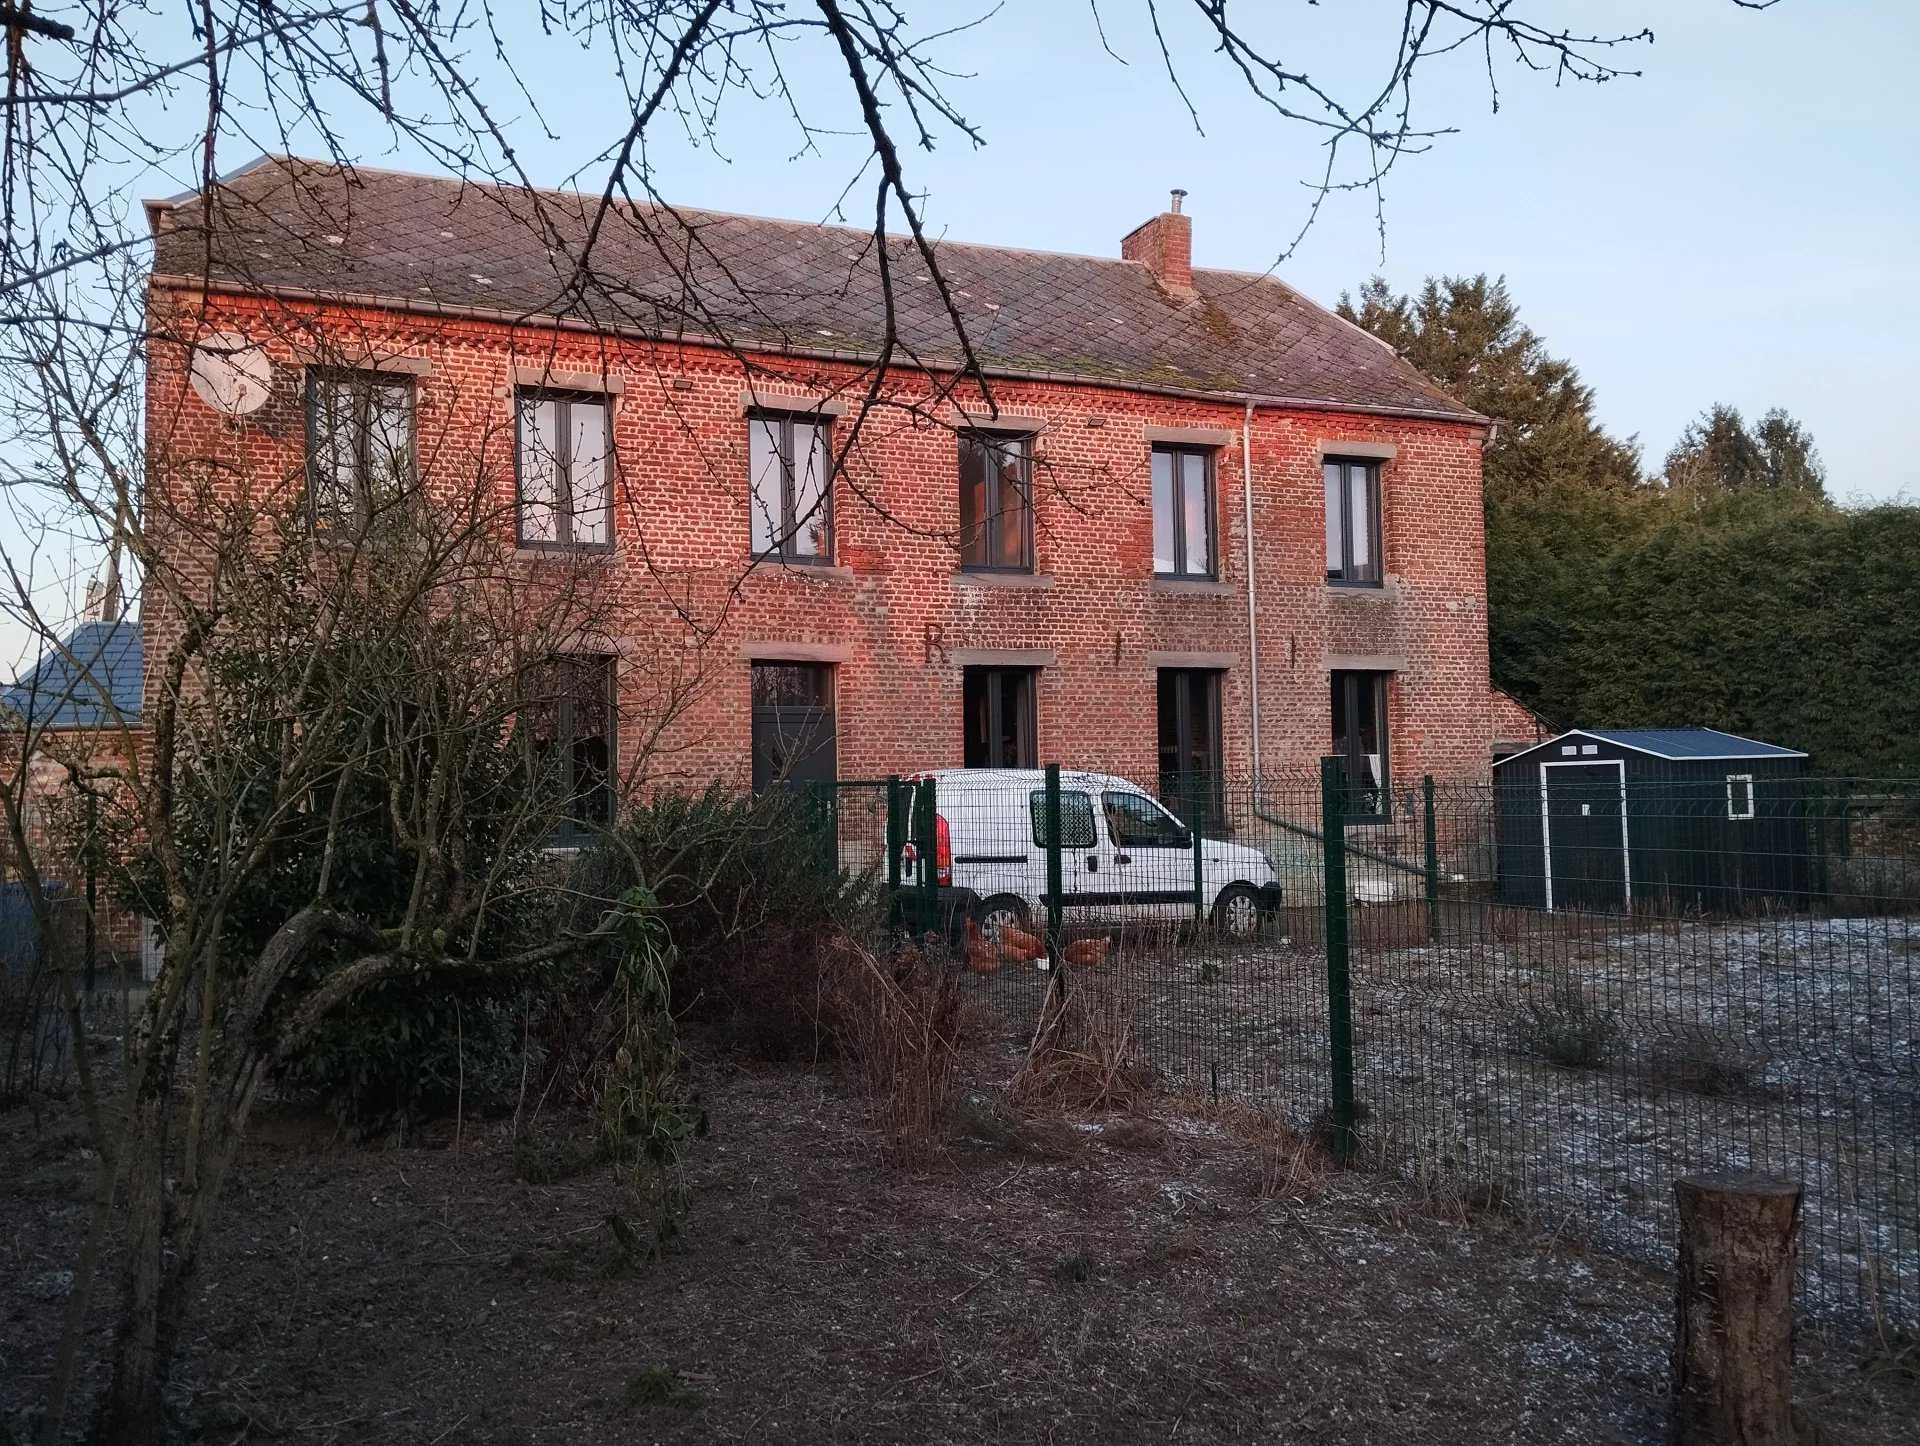 Residential in Avesnes-sur-Helpe, Nord 12533514